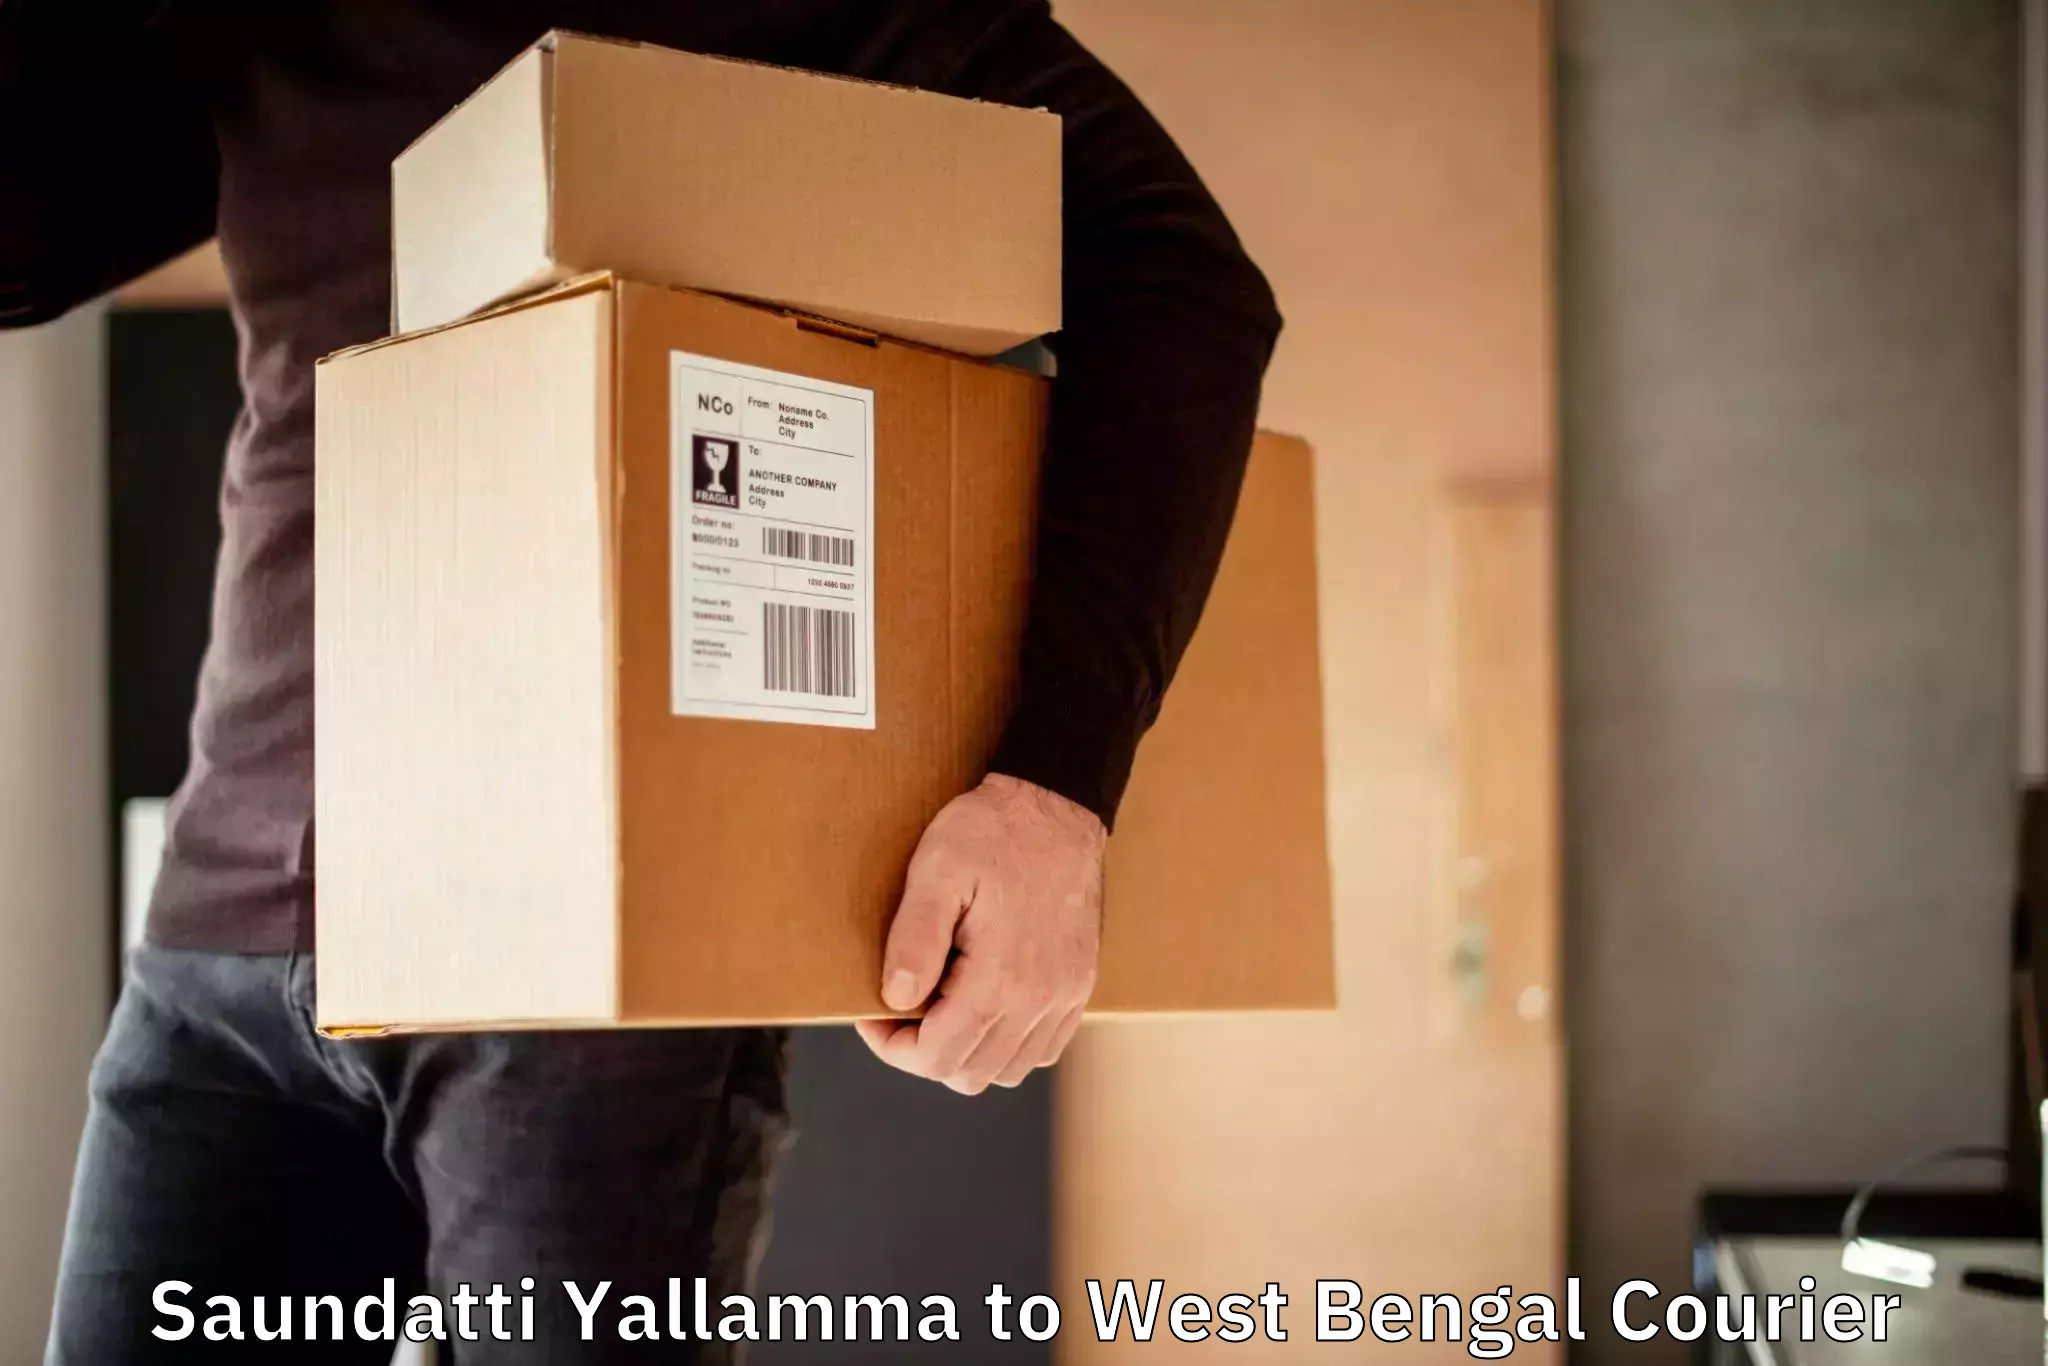 Easy access courier services Saundatti Yallamma to West Bengal